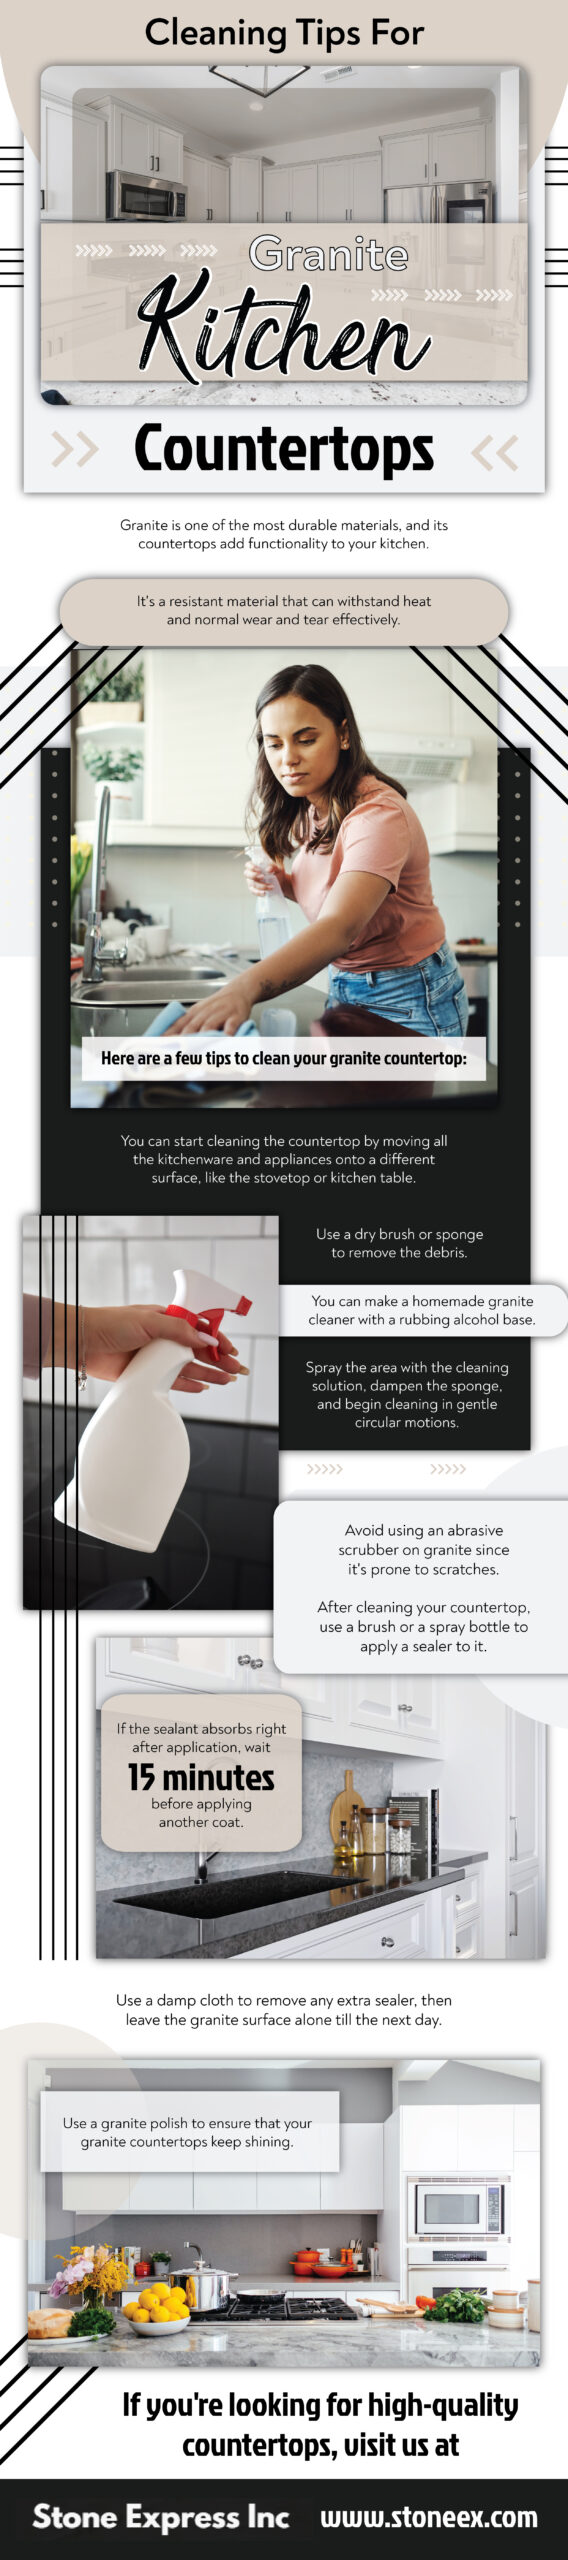 Cleaning Tips For Granite Kitchen Countertops Inforgraph